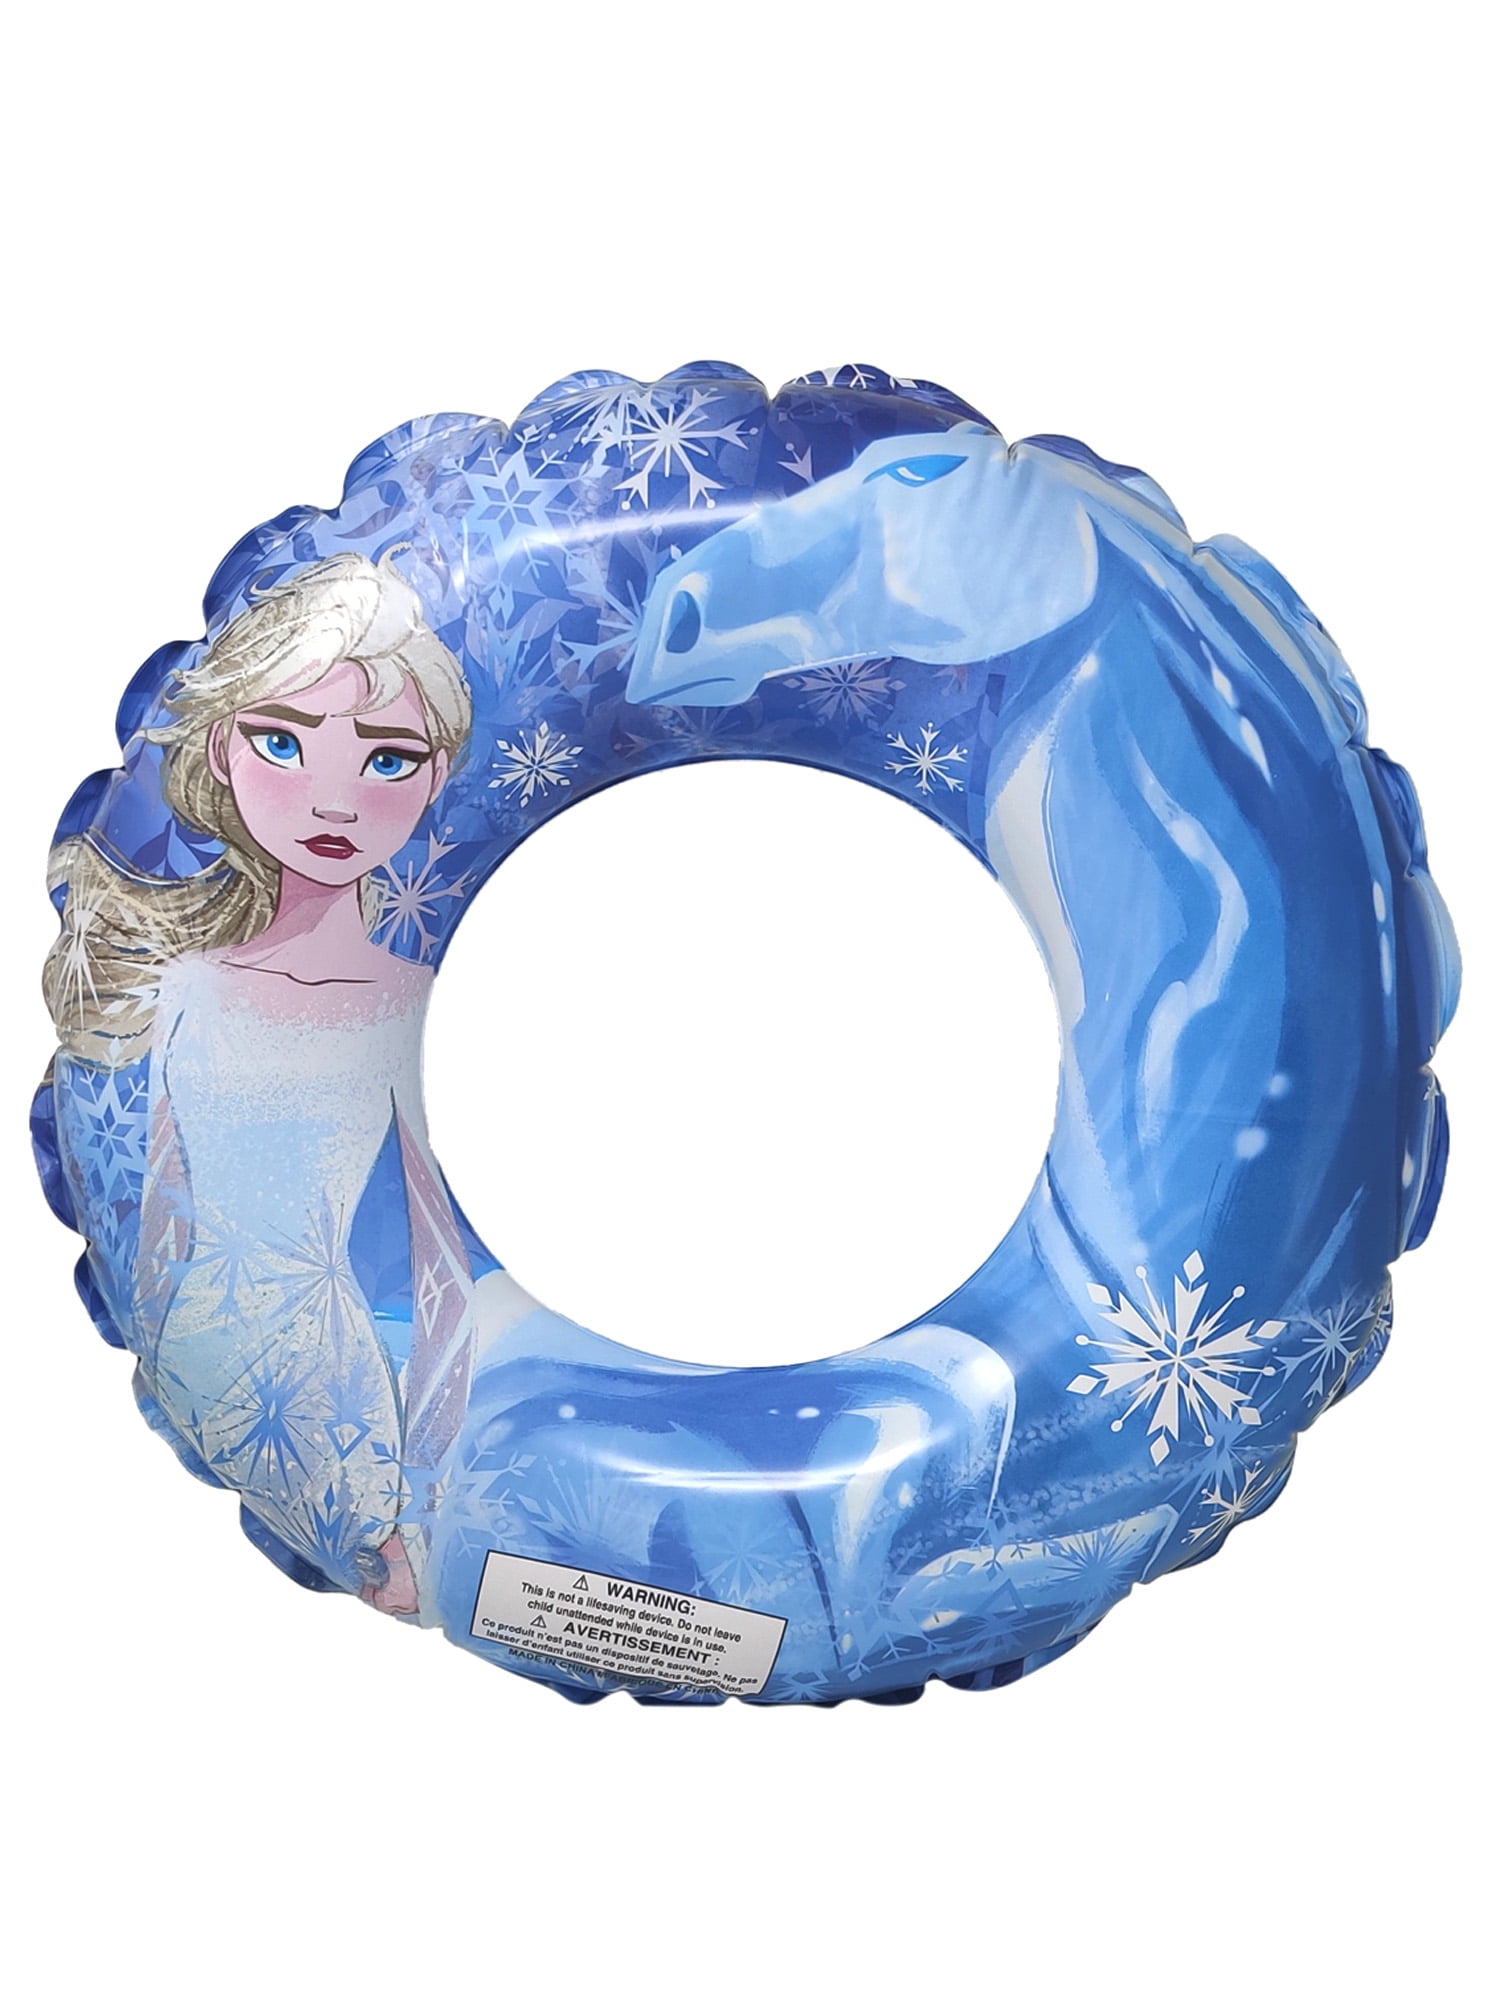 Disney Frozen Elsa and Anna Swimming Pool Inflatable Arm Floats 27686 Frz for sale online 